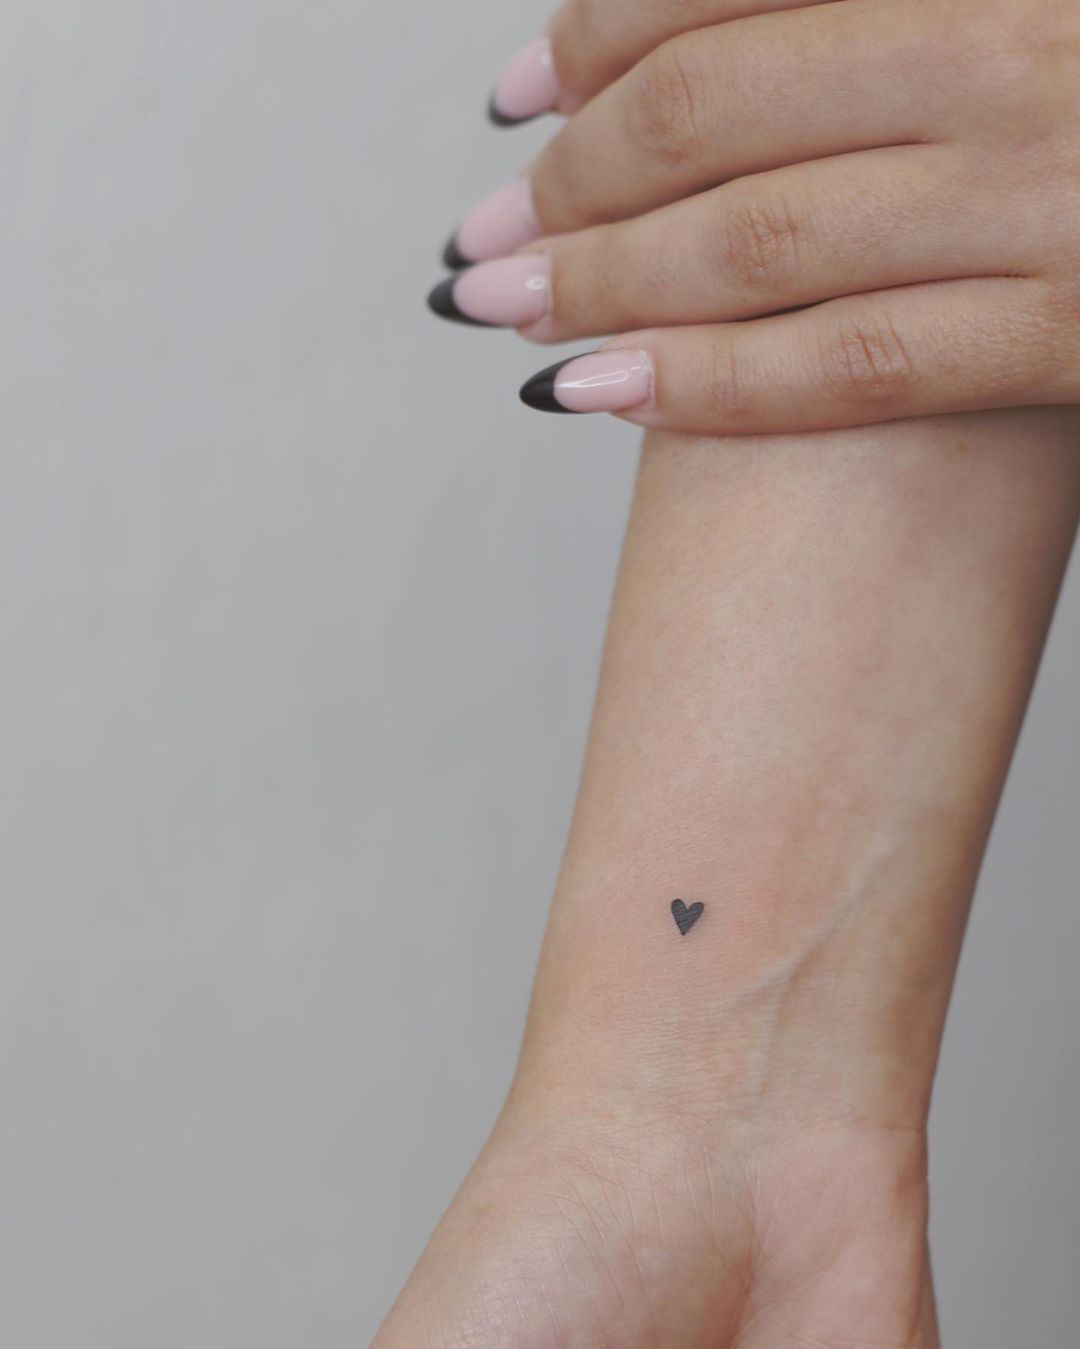 28 Cool Small Tattoos for Women in 2023 - Saved Tattoo